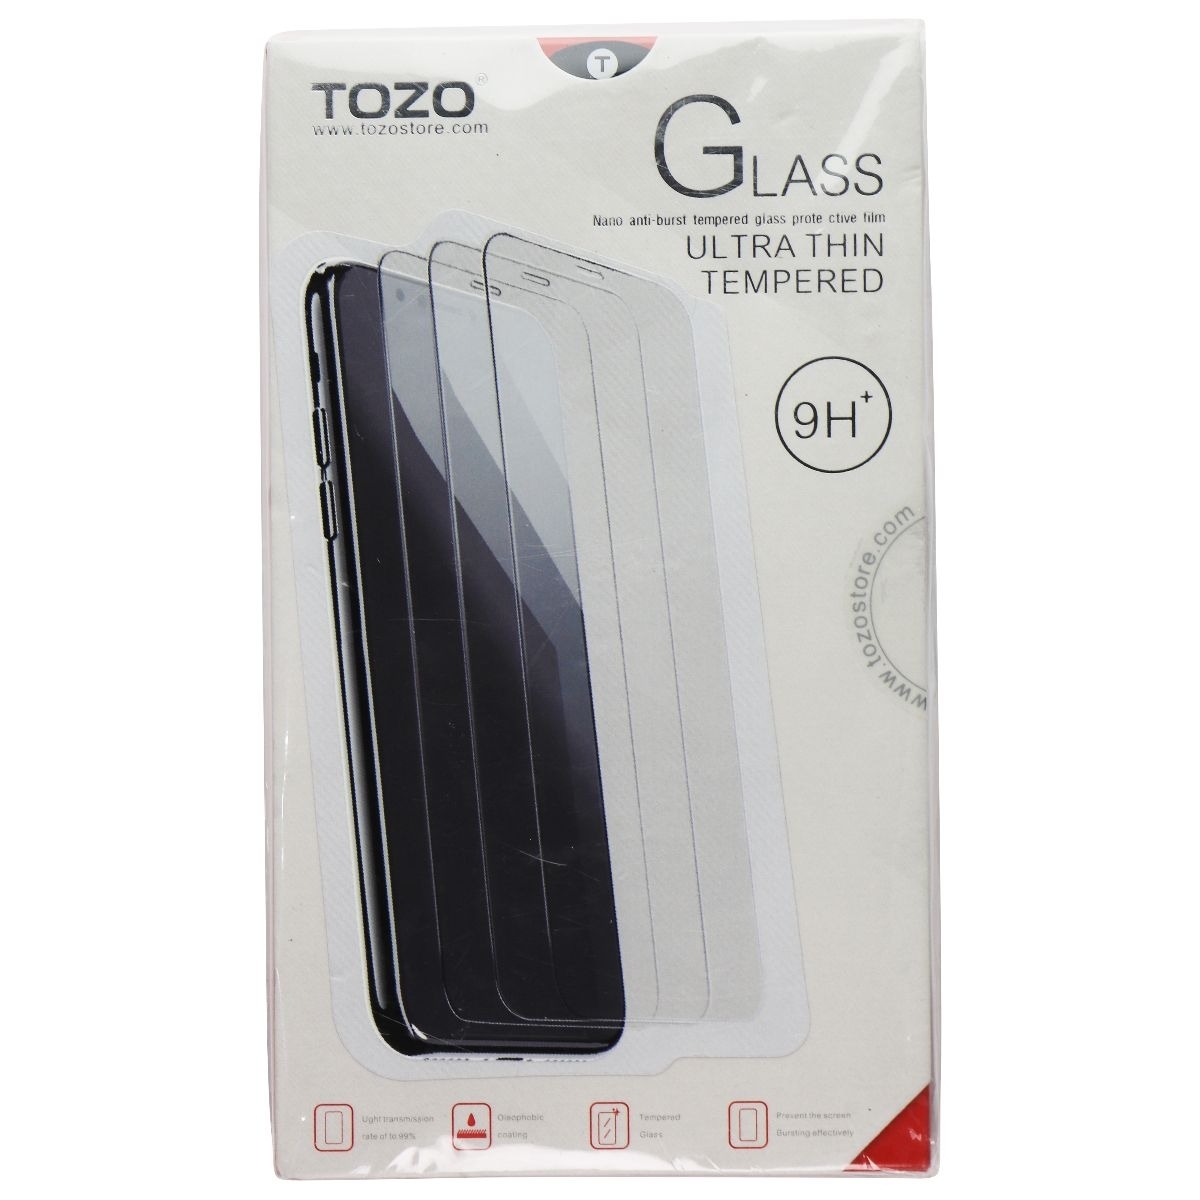 Tozo Ultra Thin 9H Tempered Glass For Apple IPhone Xs Max - Clear (Refurbished)